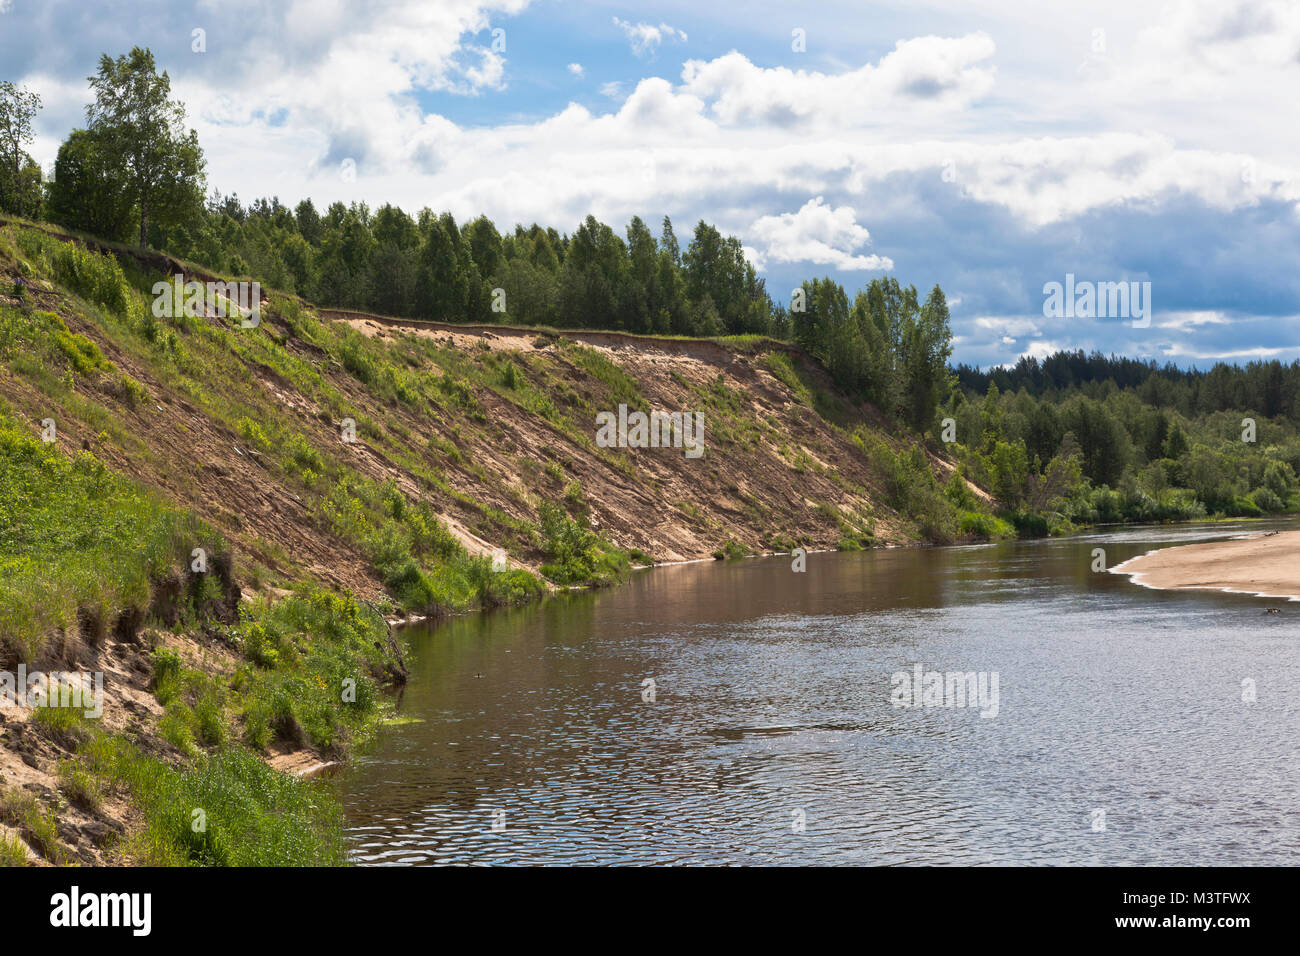 Steep bank of the river Vaga. River View near the village Undercity, Velsky district, Arkhangelsk region, Russia Stock Photo